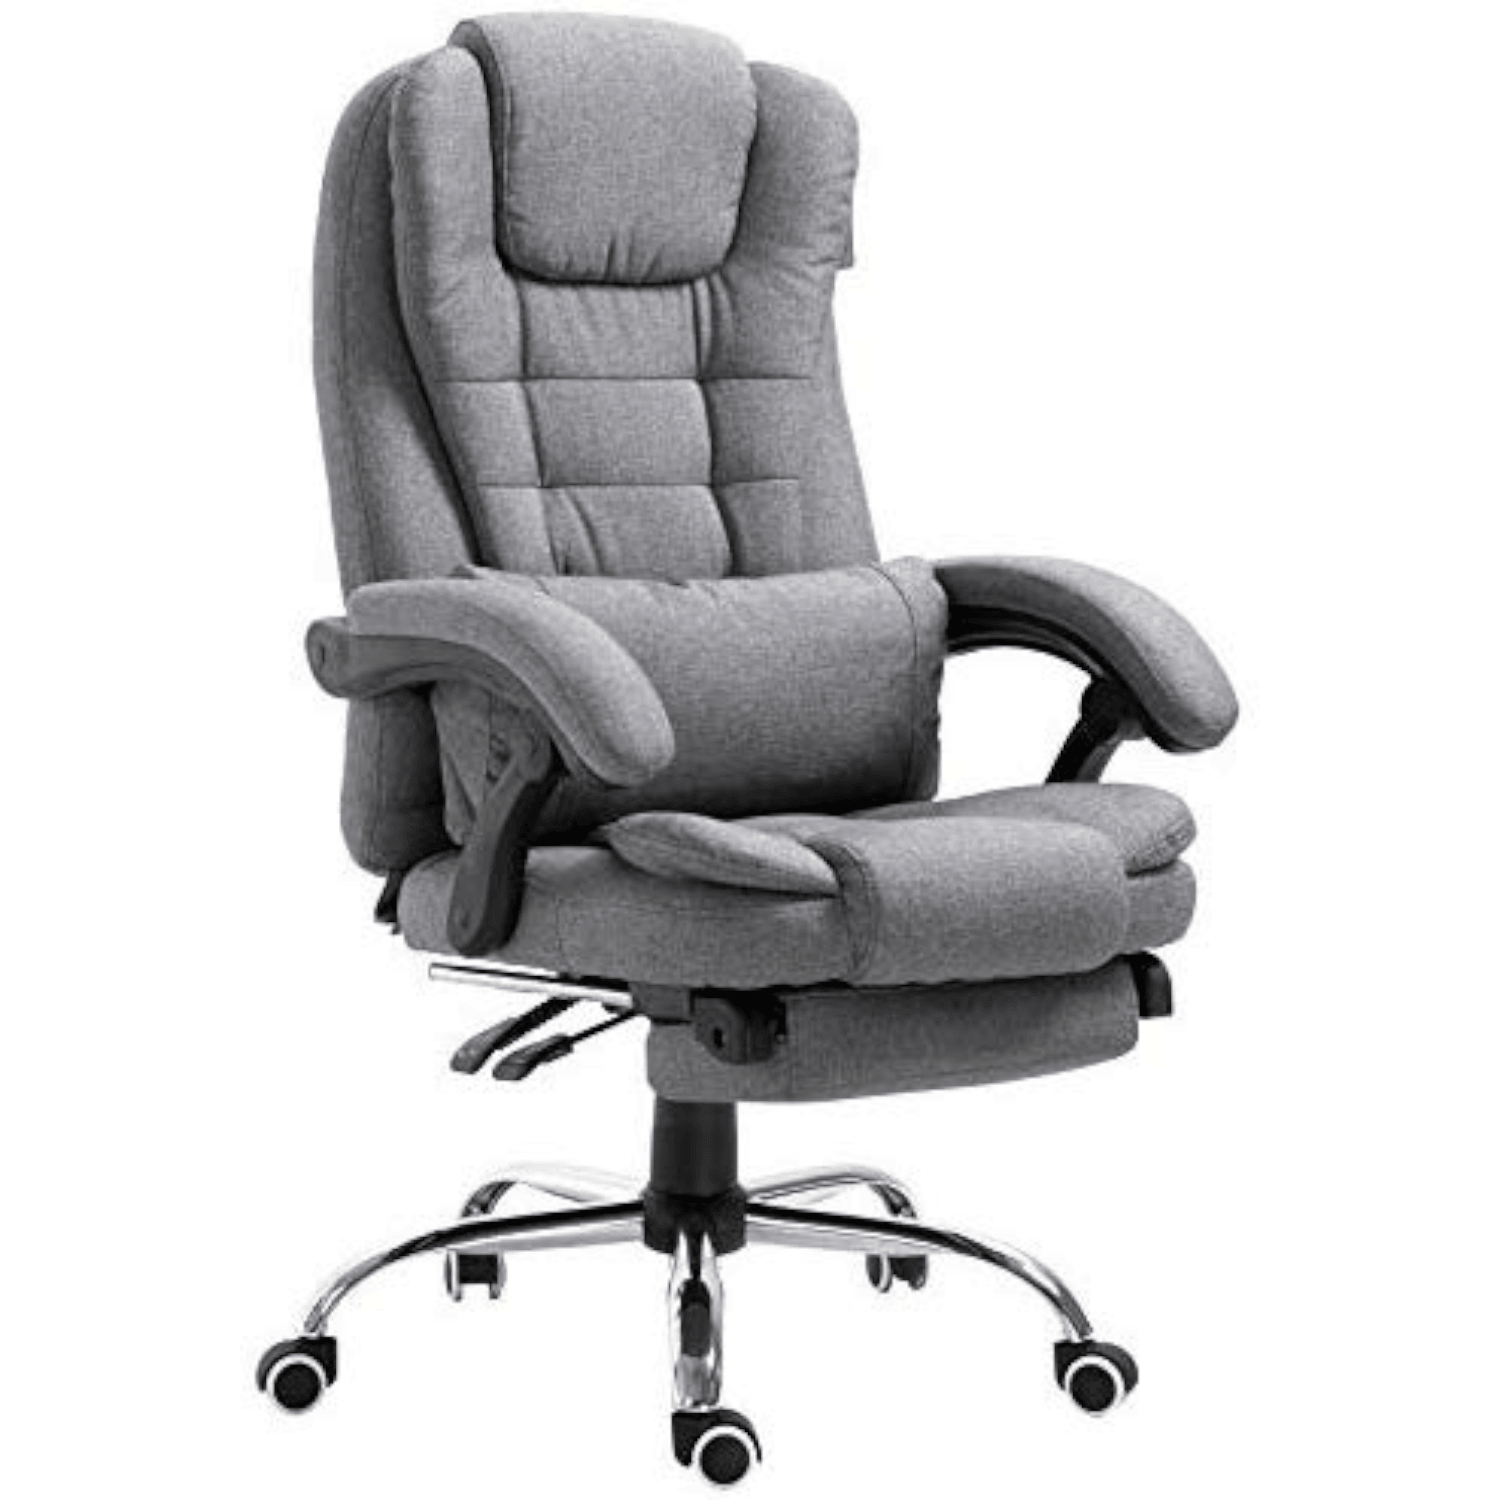 Office Chair with Leg Rest, for working in the reclining position.